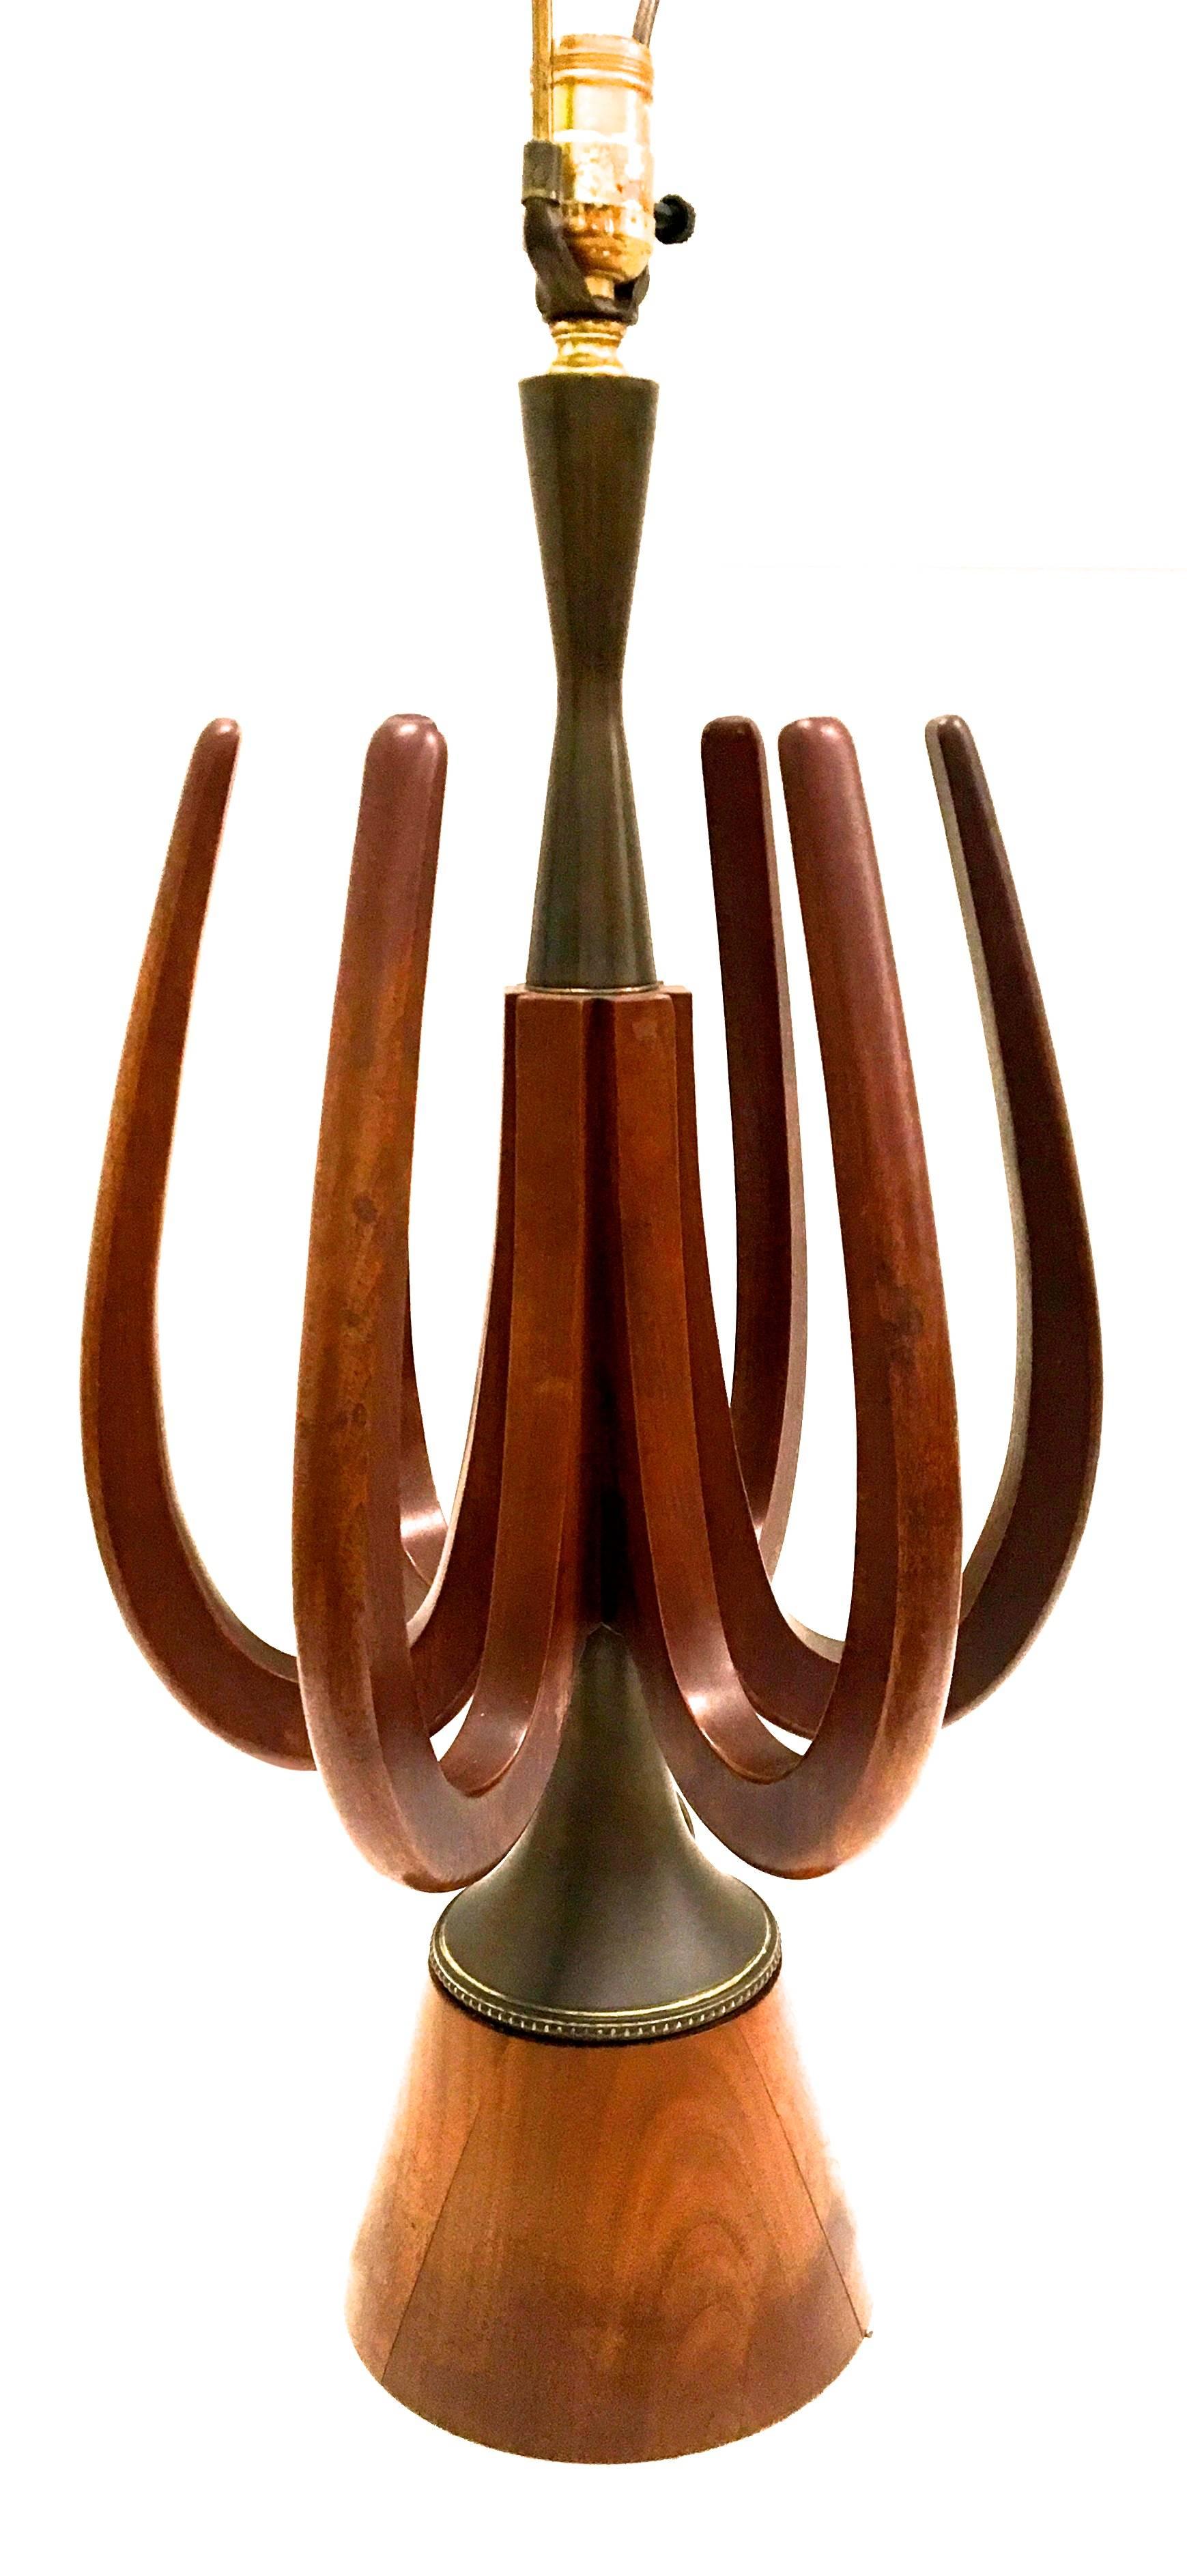 Presented here is a beautiful mid century modern lamp from the late 1960´s early 1970´s. The lamp is hand carved from walnut wood. There are protruding spires the extend out from the base of the lamp and encircle the center of the top. A very unique